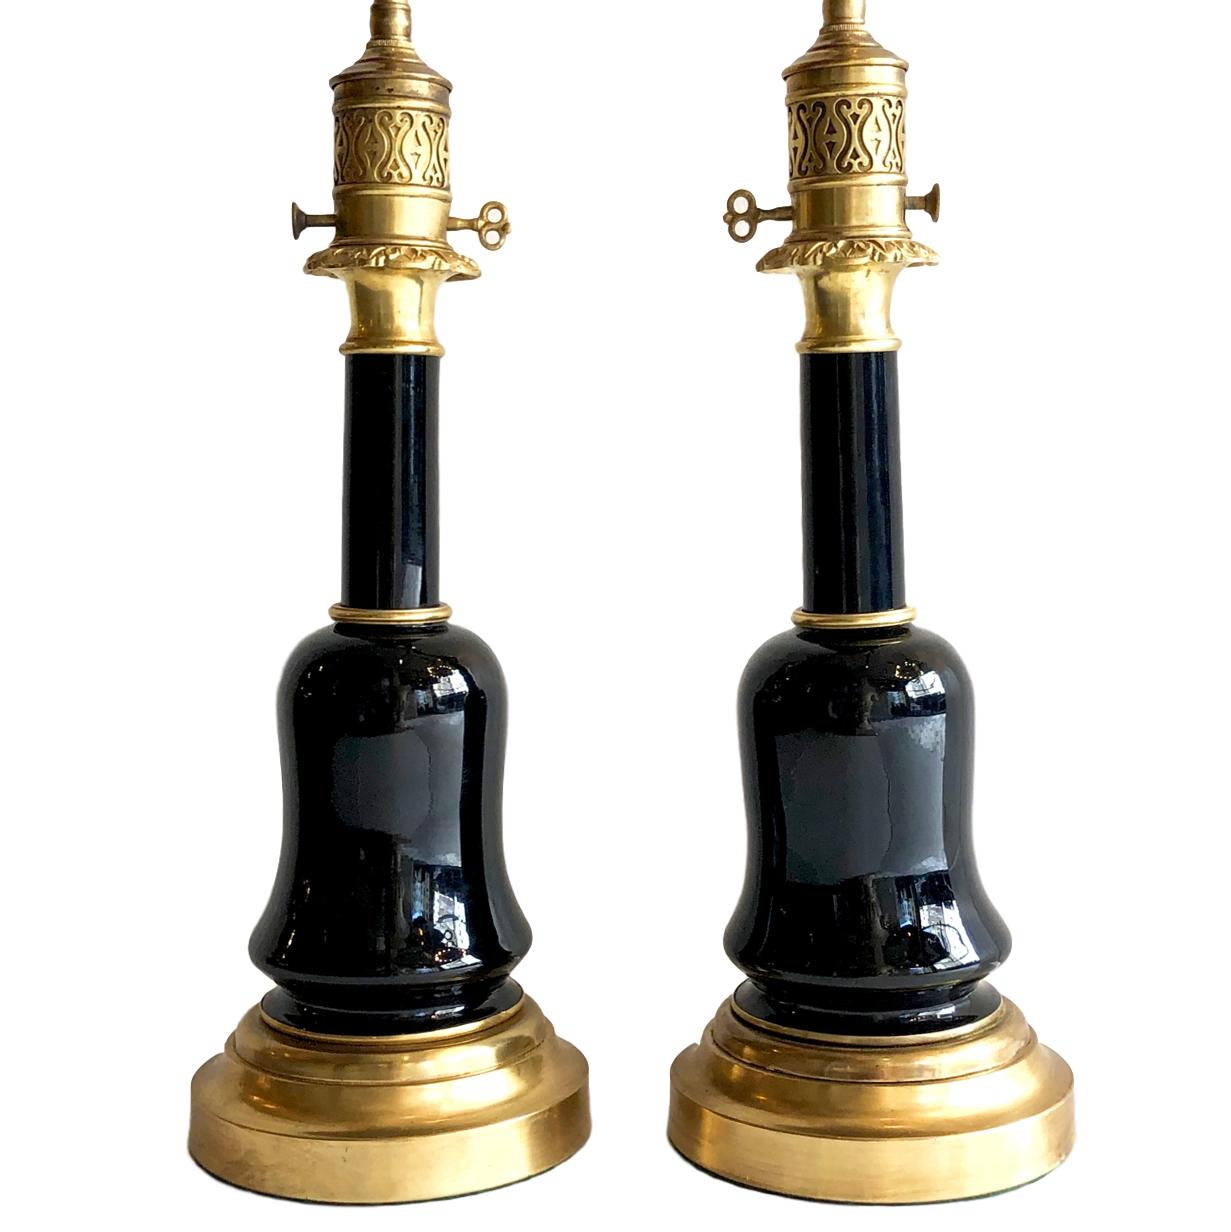 A pair of circa 1900 French black glass oil lamps converted to electrified table lamps.

Measurements:
Height of body: 17